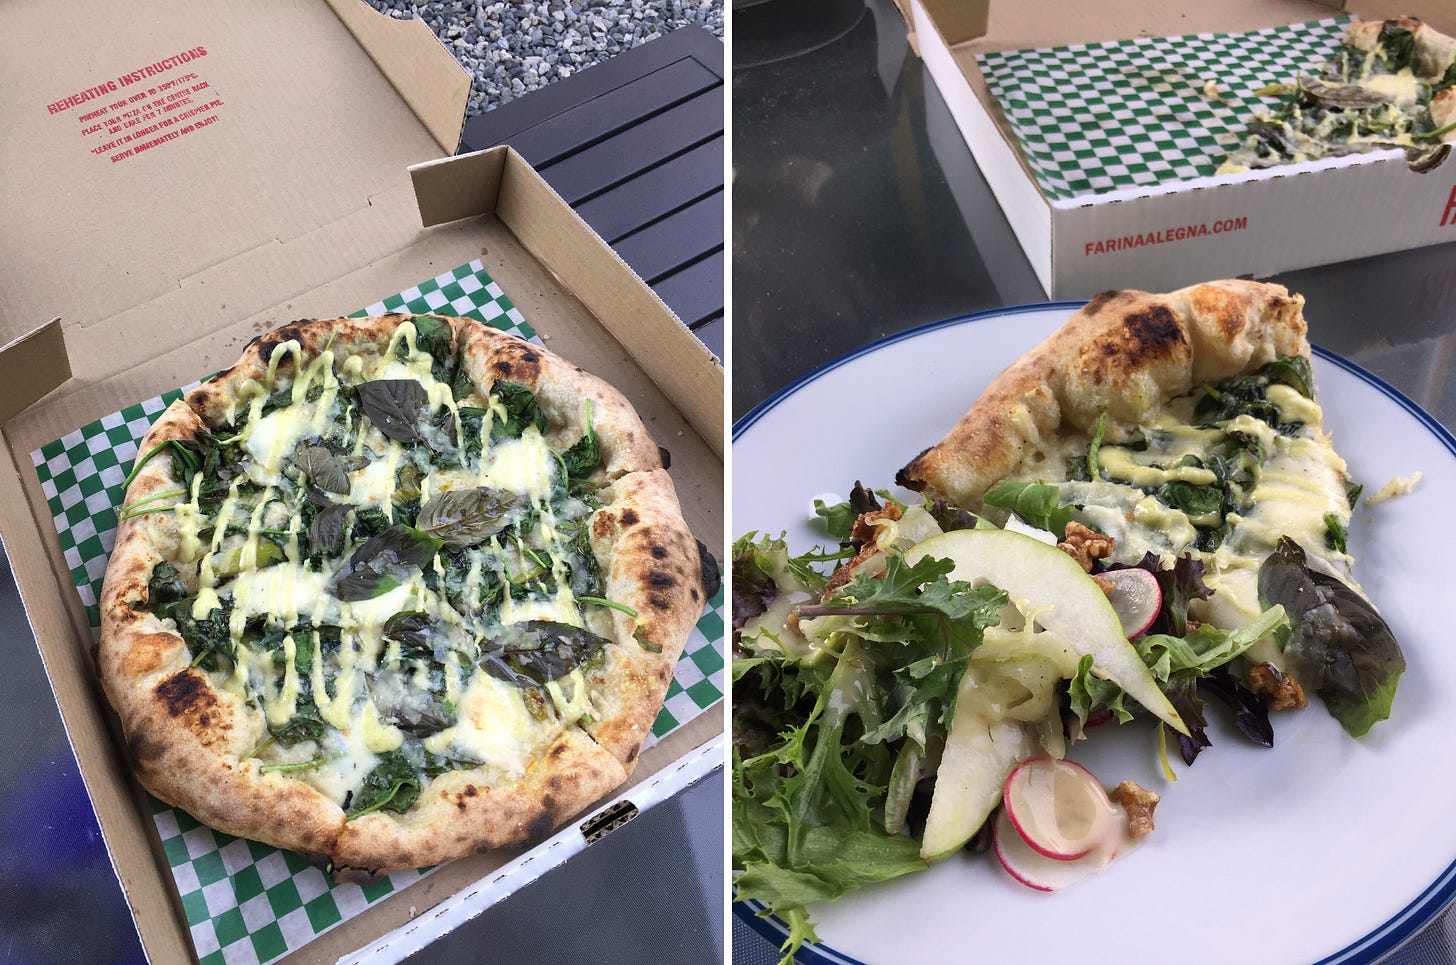 left image: an open pizza box showing a wood-fired pizza with basil leaves and a drizzle of mayo. Right image: a piece of the pizza on a plate next to a portion of the salad described in the caption. 